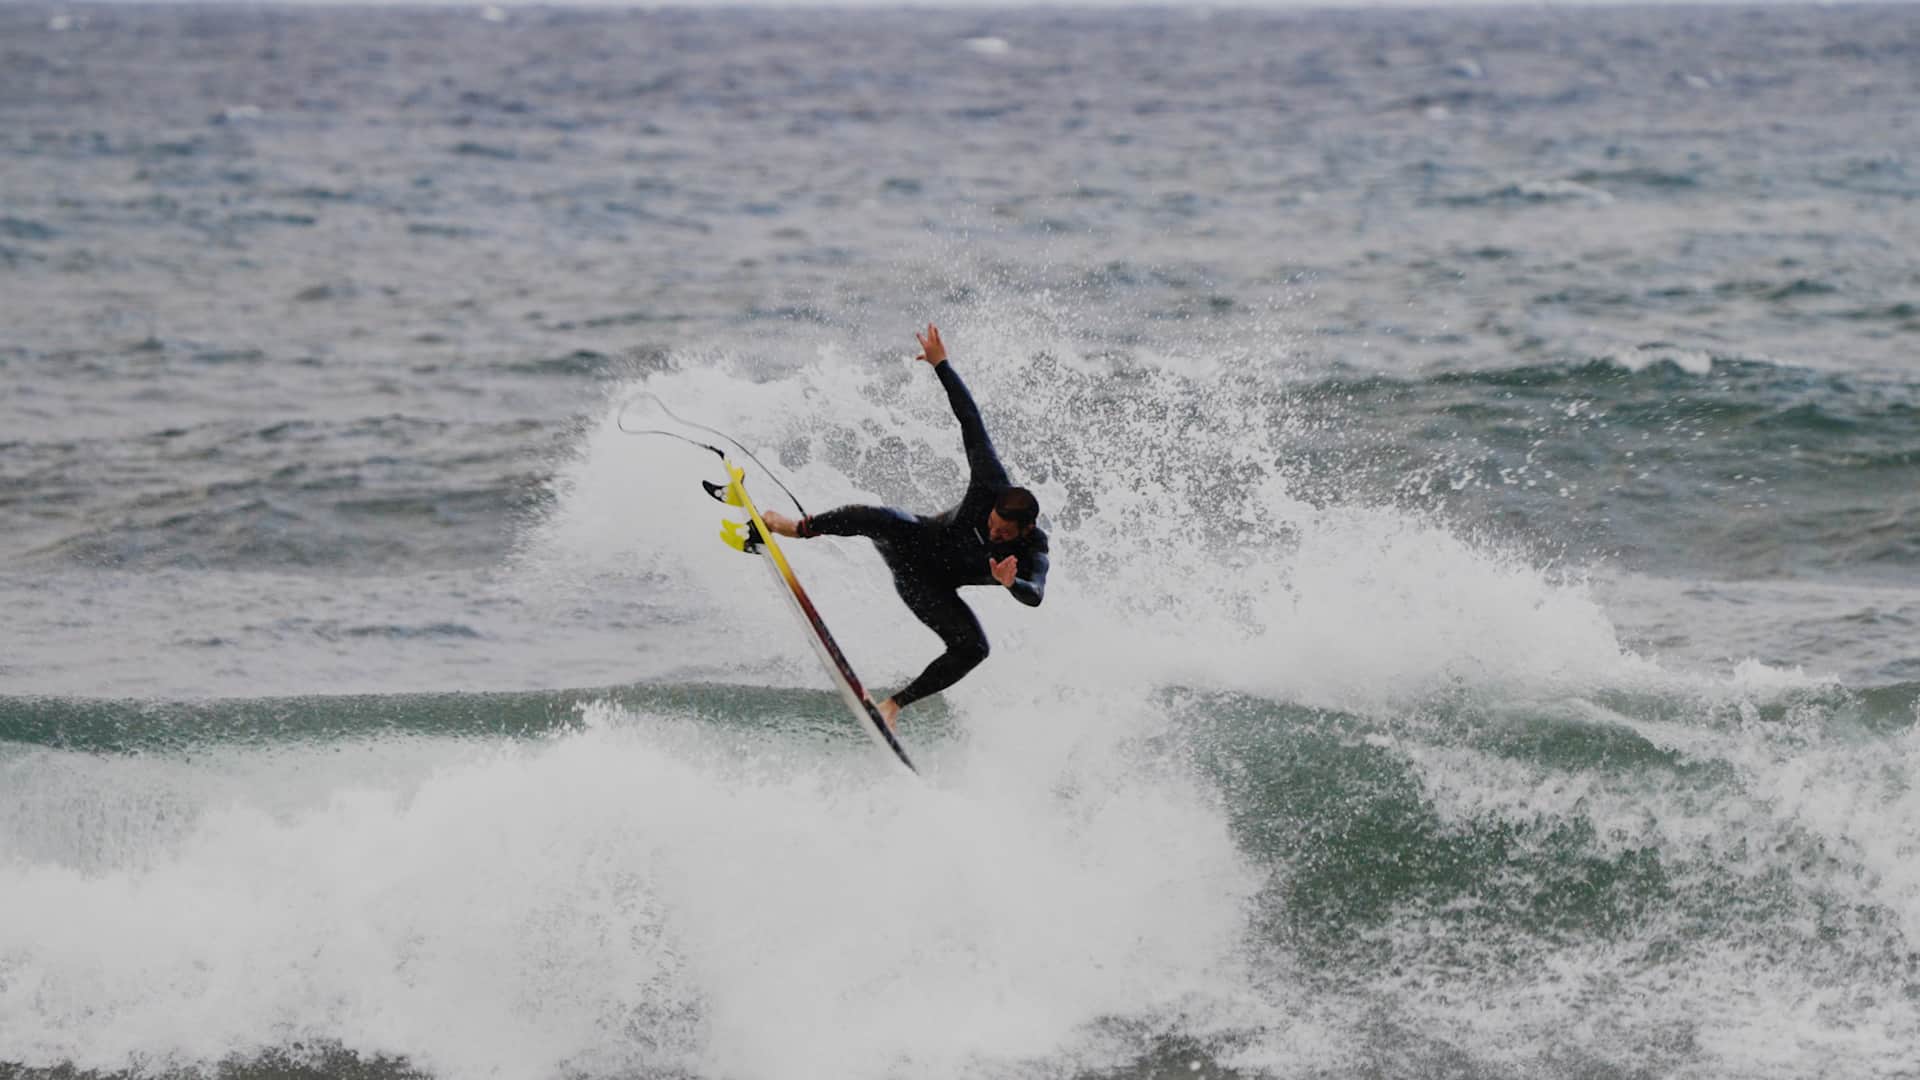 Roby D'Amico surfing at home in Italy.